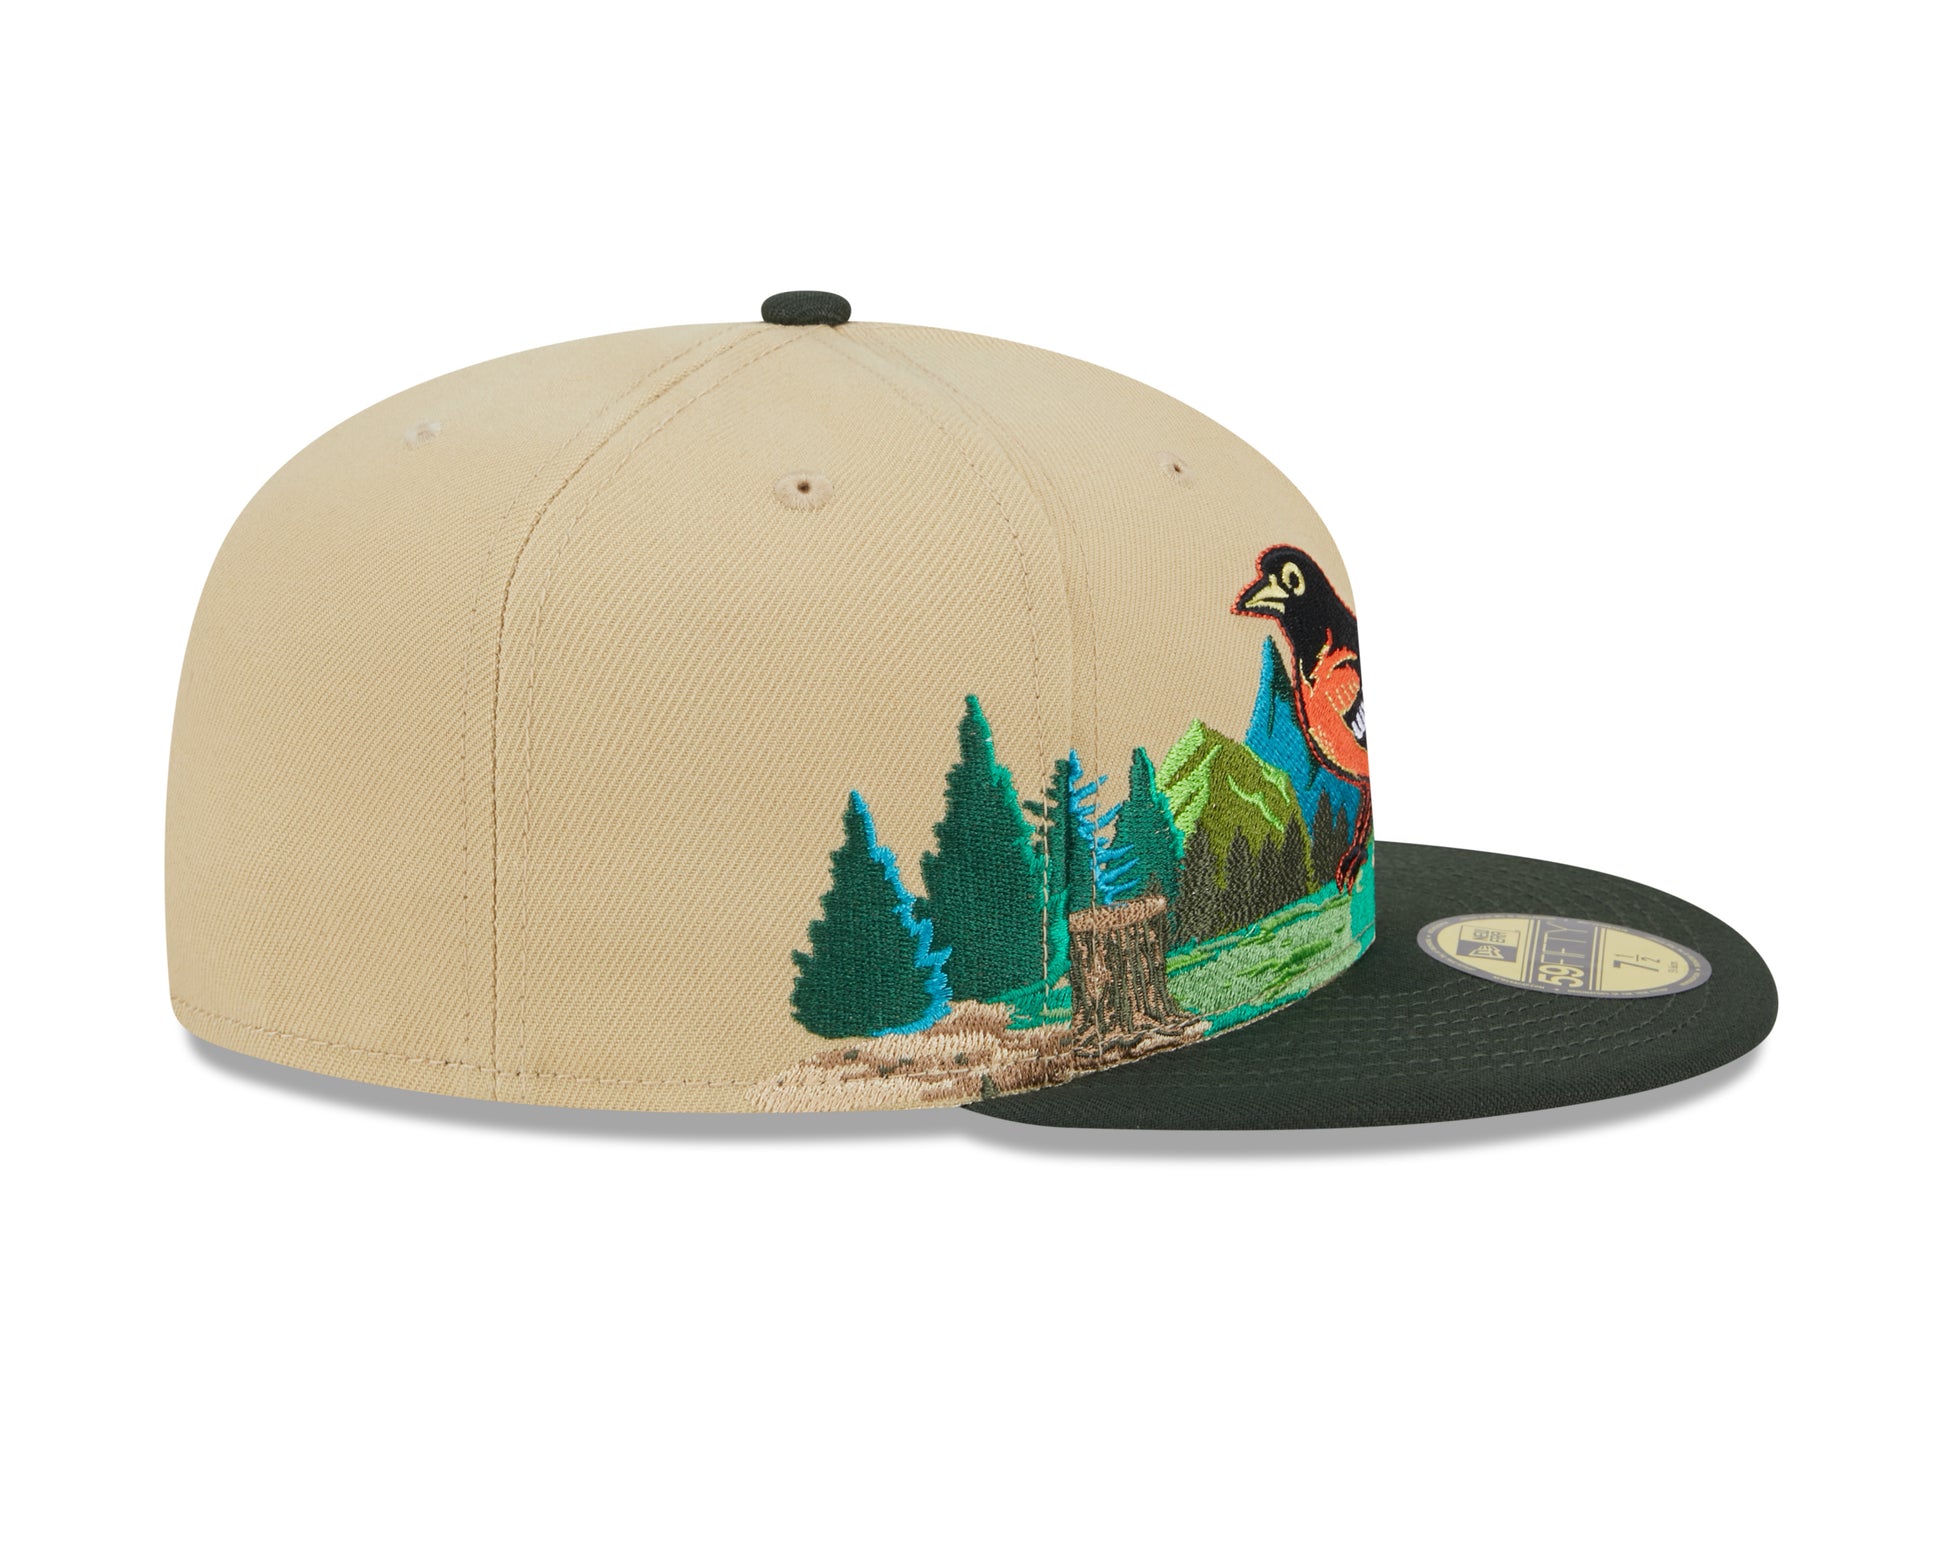 New Era - 59Fifty Fitted Cap TEAM LANDSCAPE - Baltimore Orioles - VGD - Headz Up 